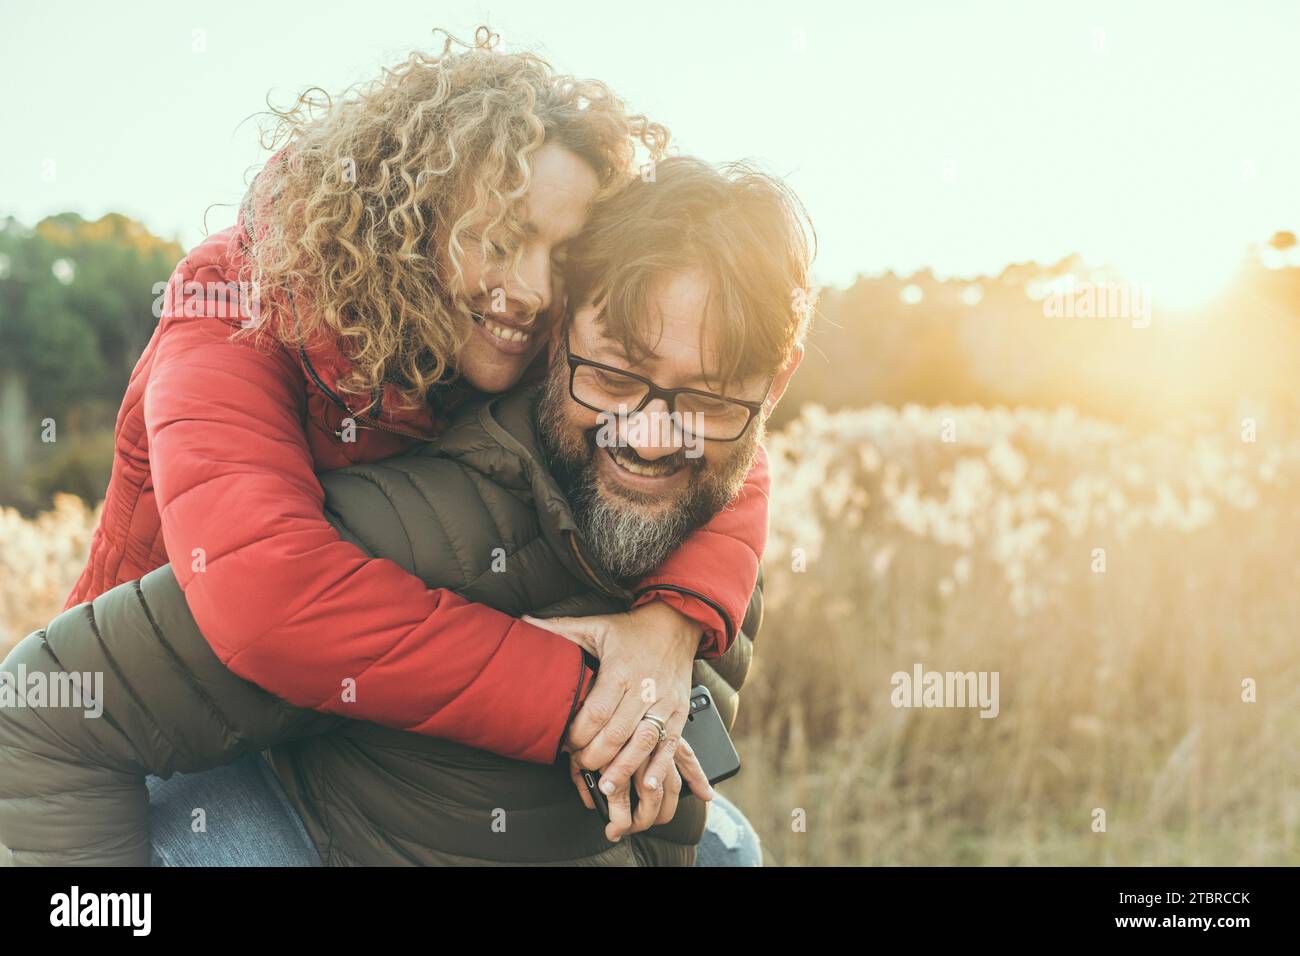 Young adult mature couple in love hugging and smiling with romance expression on face. One man carry woman in piggyback on his back. Female bonding male in outdoor leisure activity together. Happiness Stock Photo